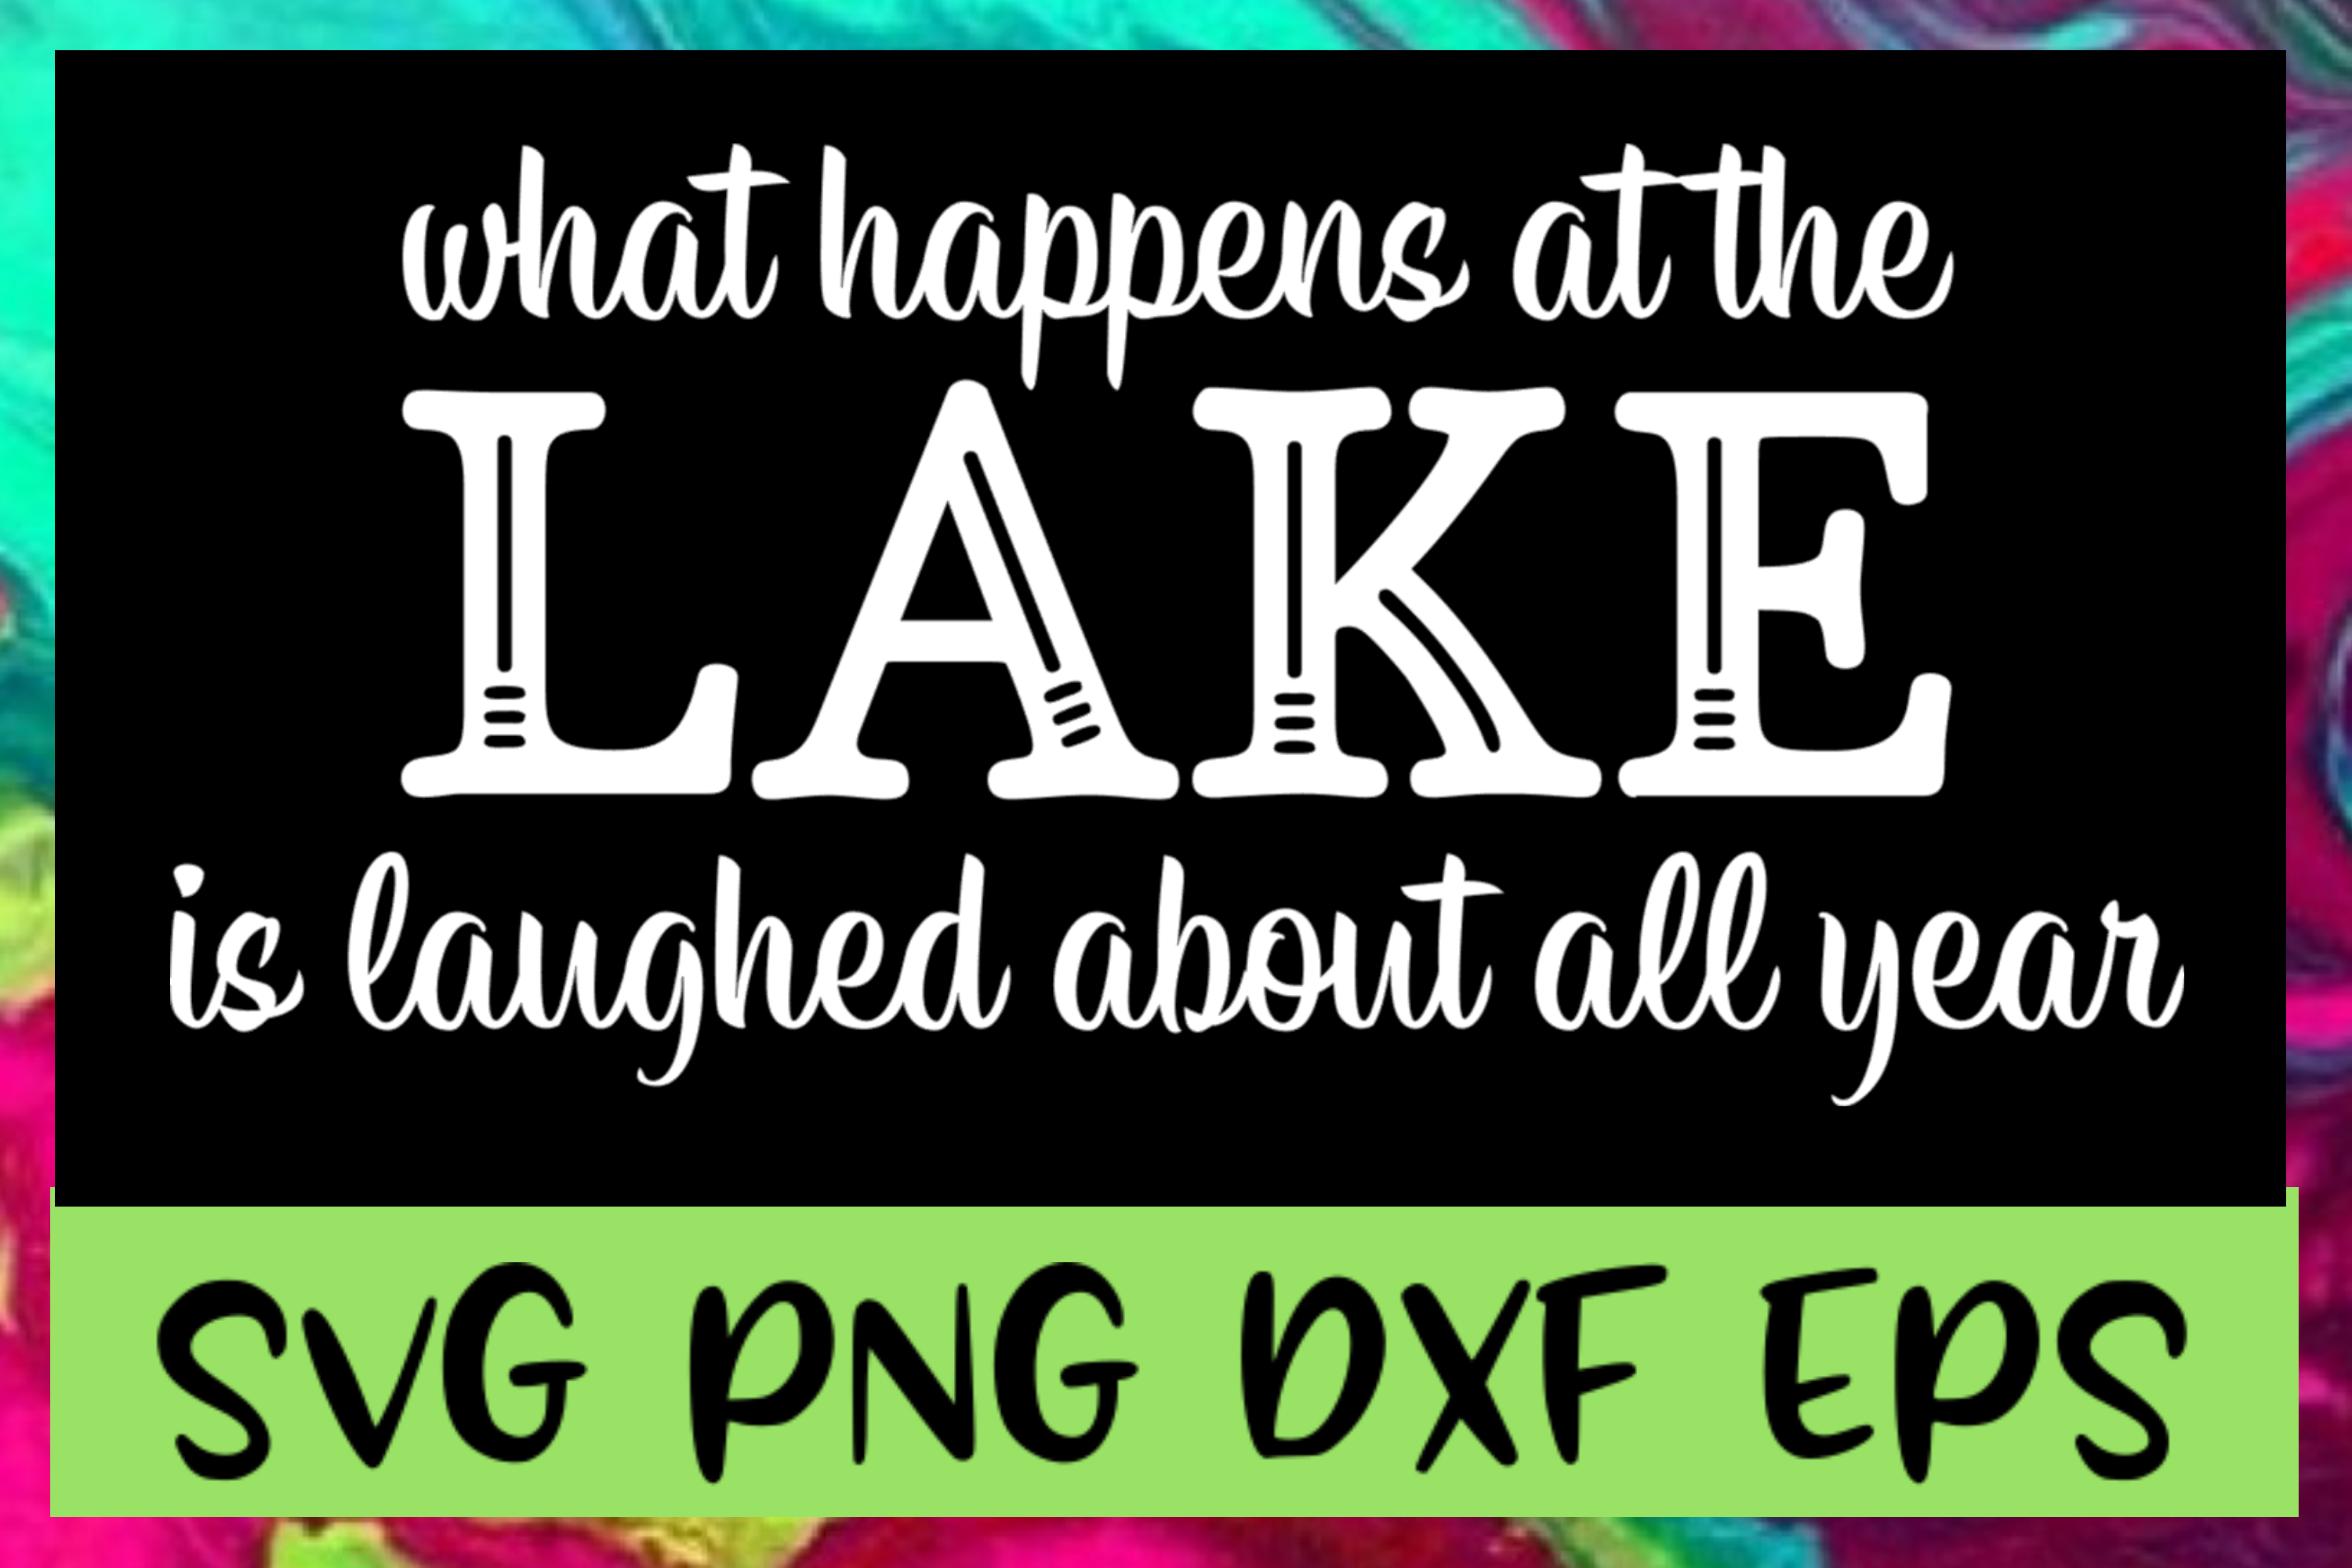 Download What Happens At The Lake SVG PNG DXF & EPS Design Files By ...